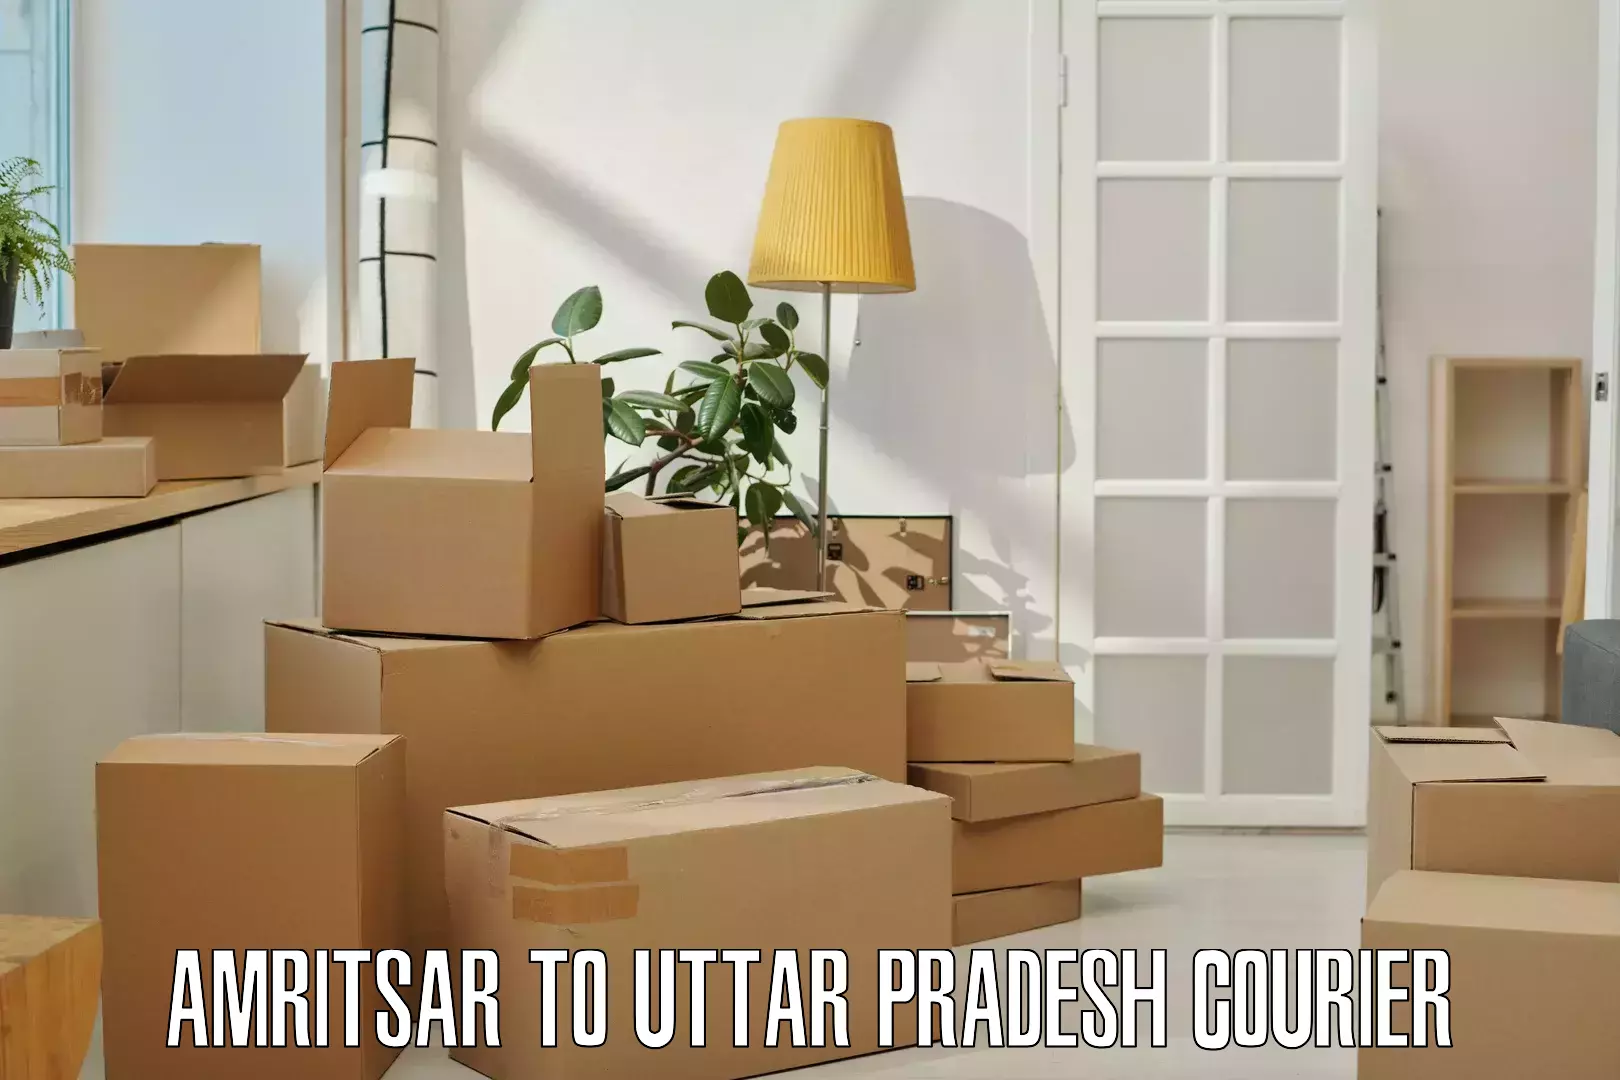 Local delivery service Amritsar to Sultanpur